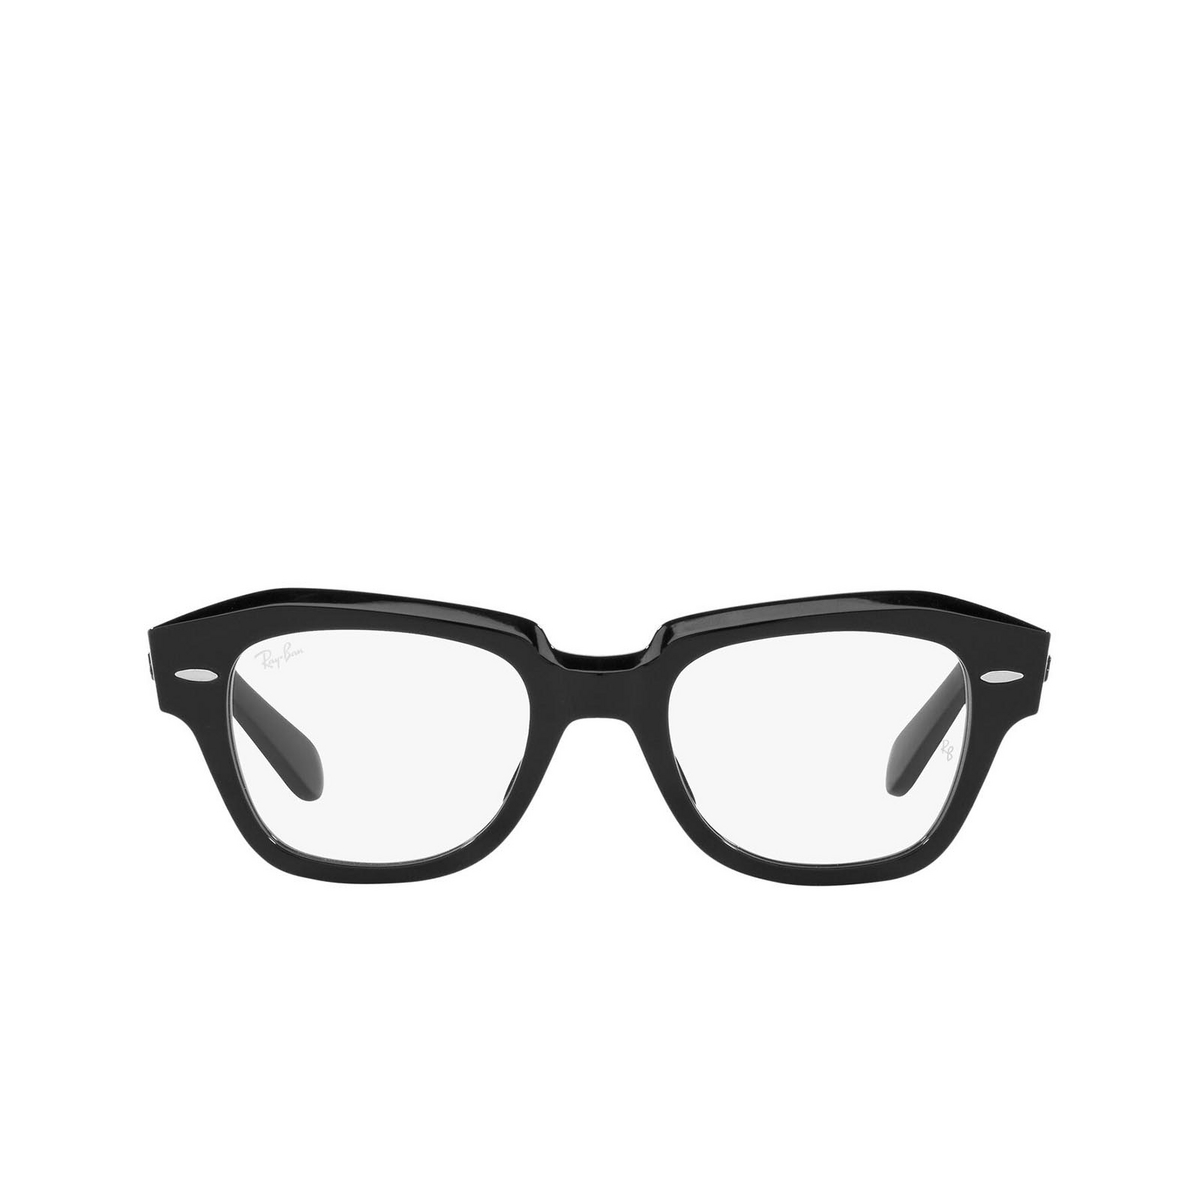 Ray-Ban STATE STREET Eyeglasses 2000 Black - front view